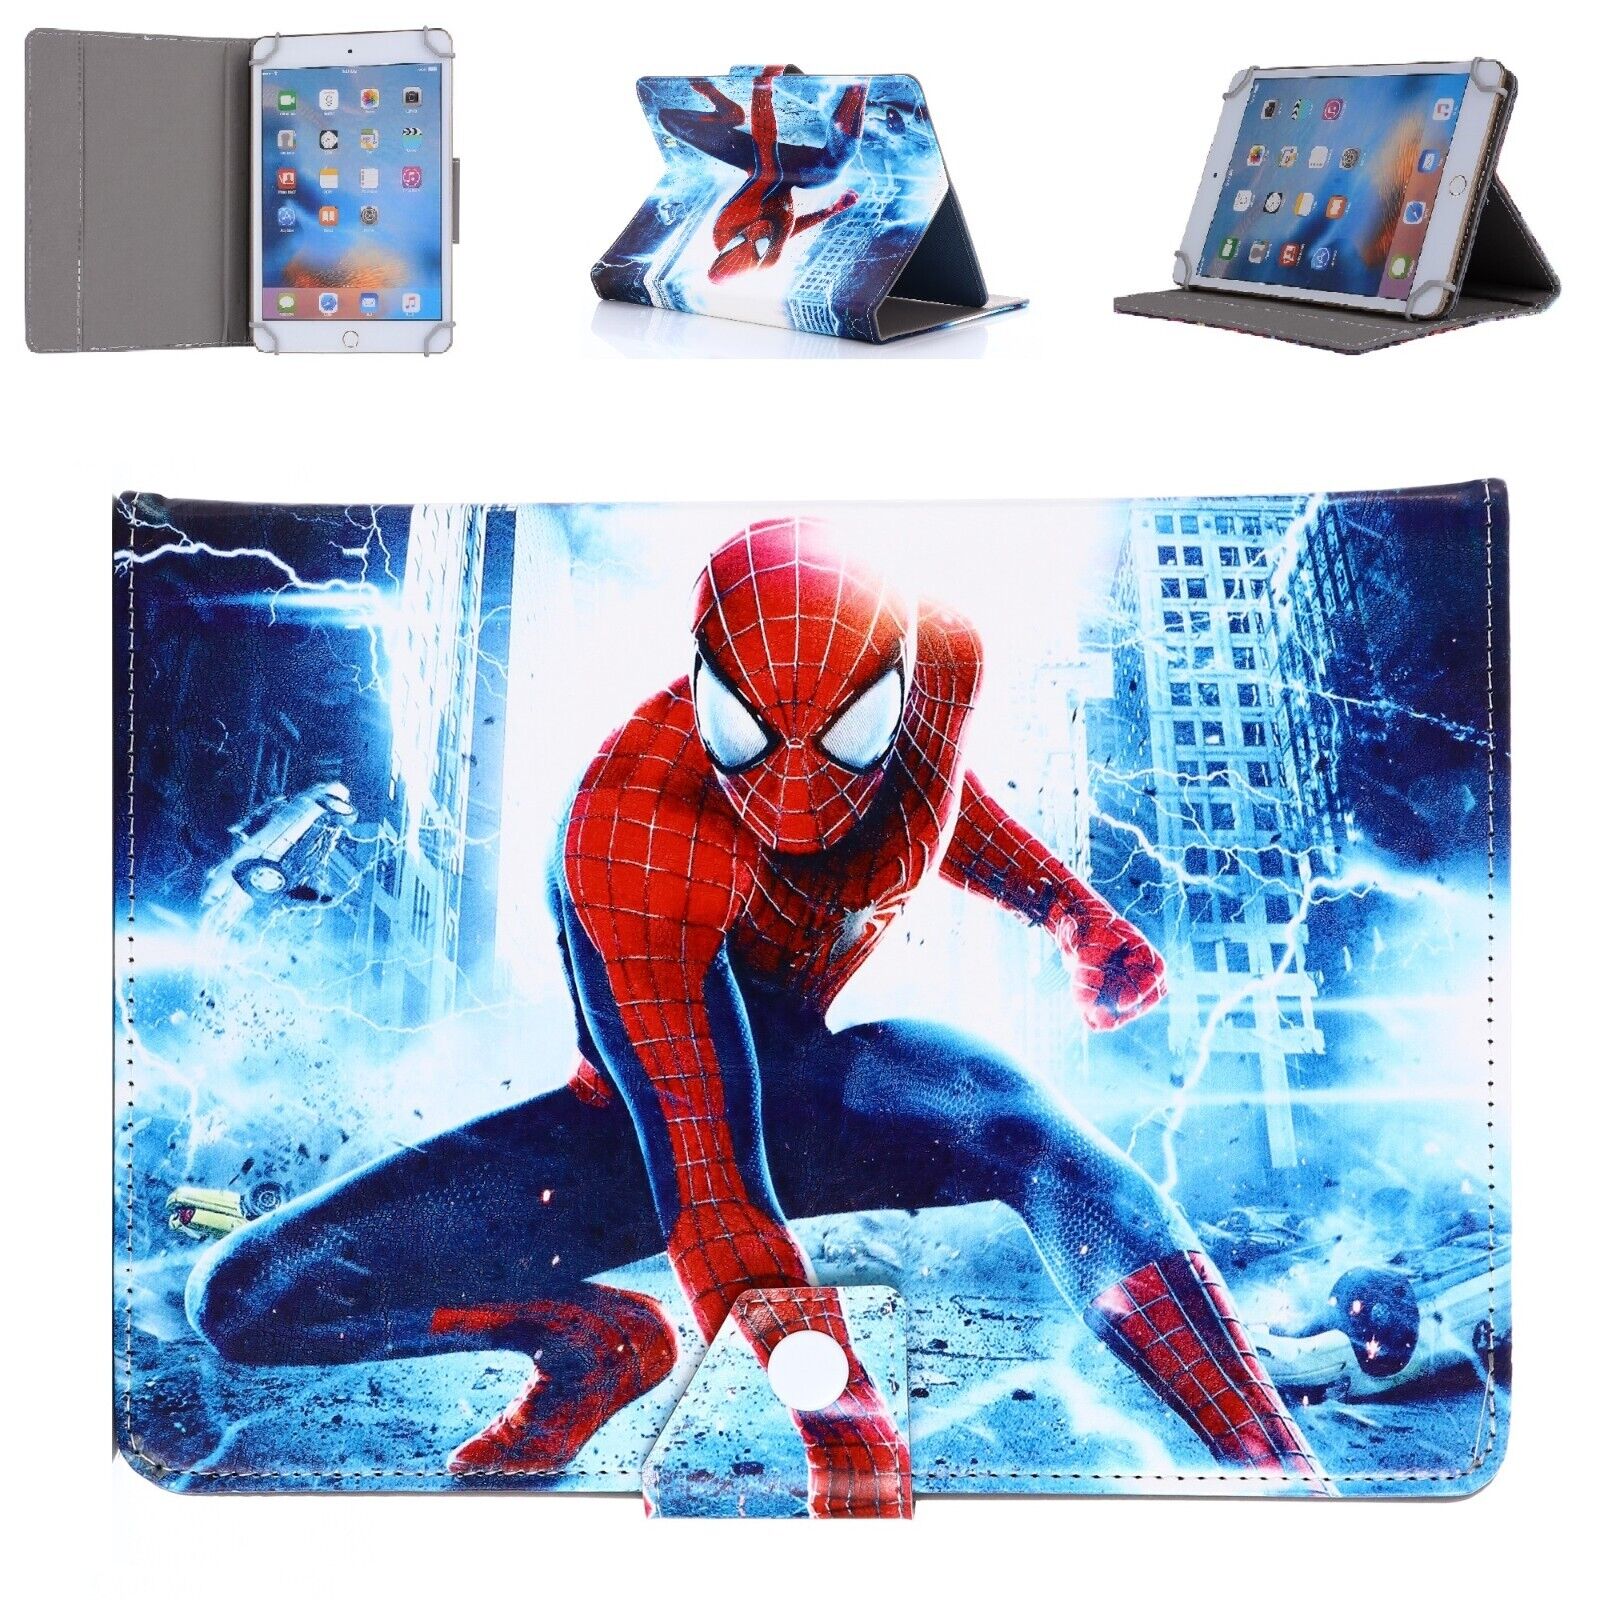 Kids standup Case for Samsung Galaxy Tablet spiderman Cover Superheroes Avengers